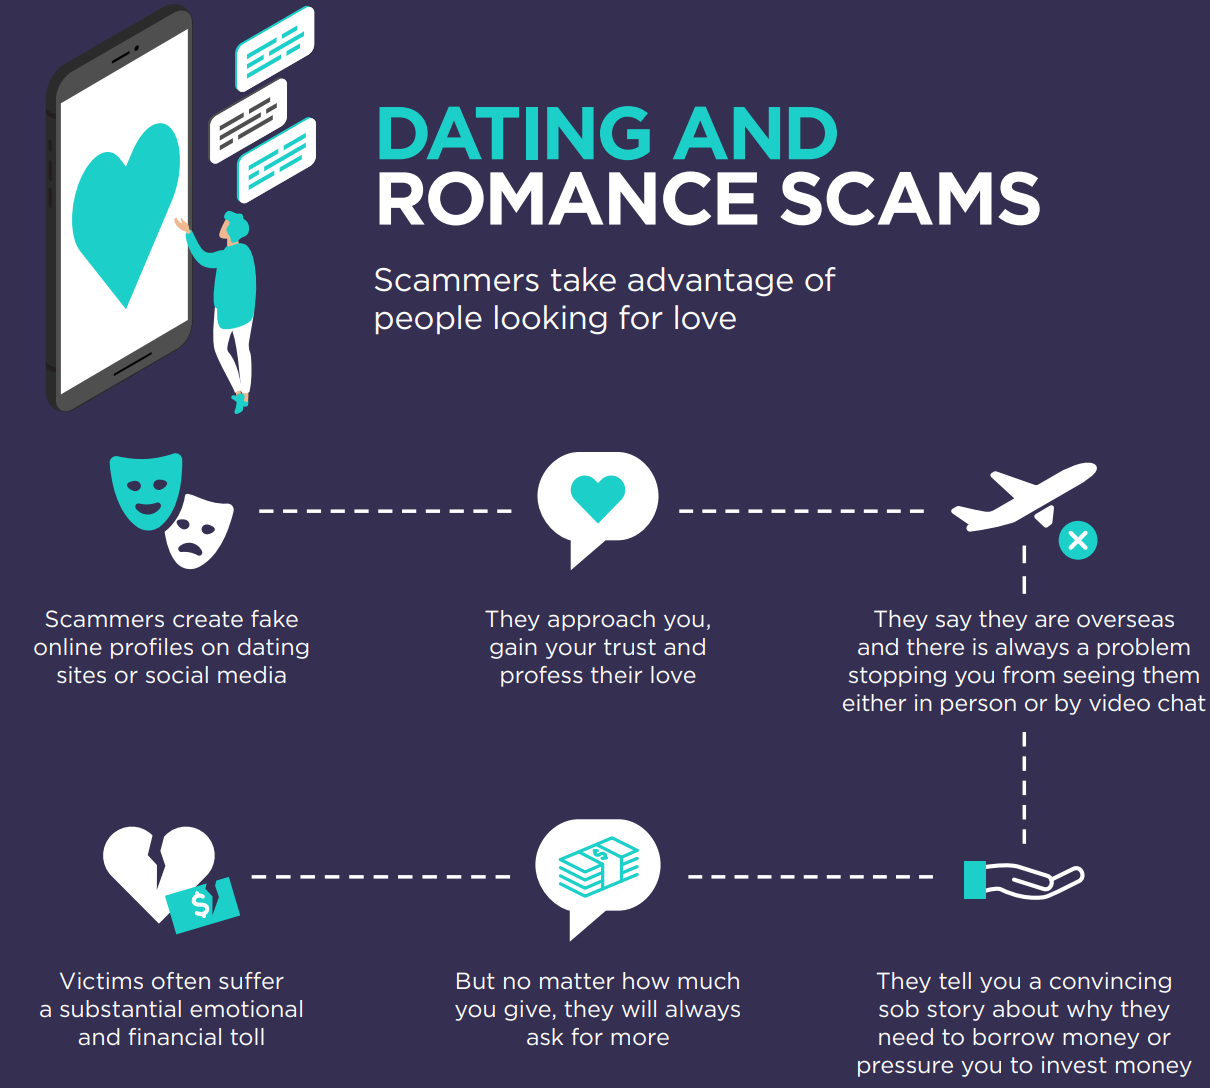 scammed on a dating site